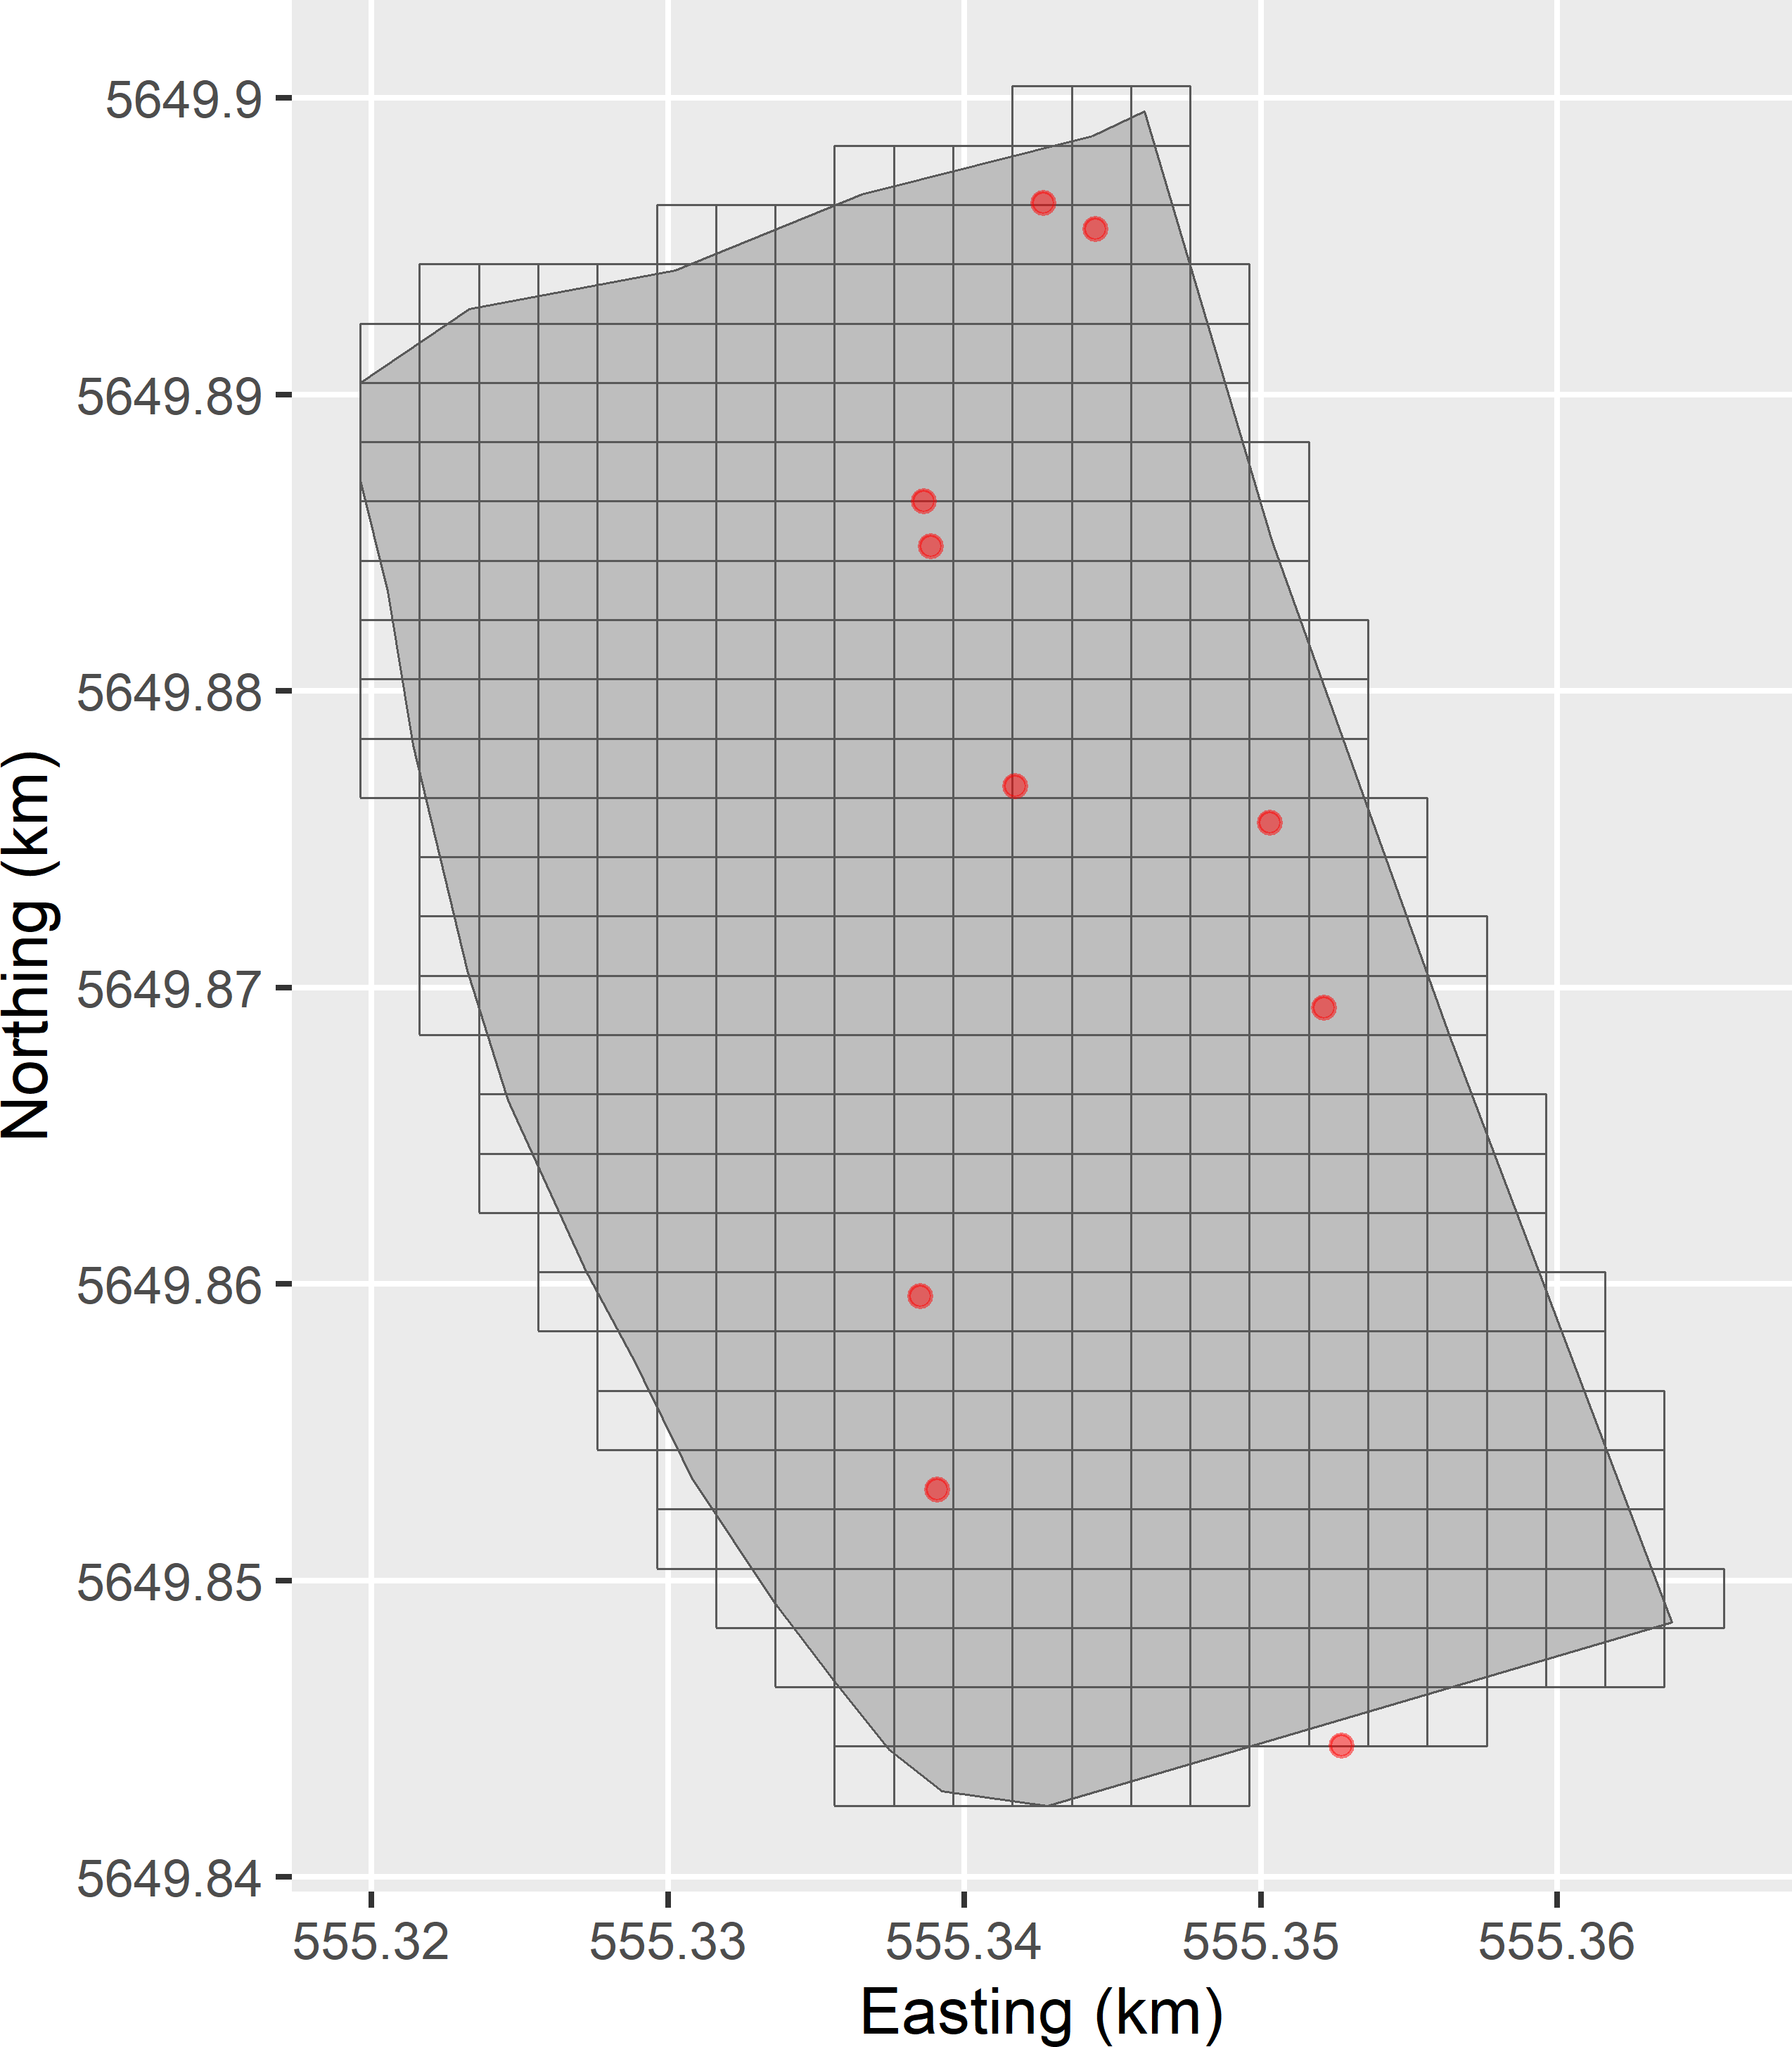 Sampling of points from discretised infinite population. The grid cells are randomly selected with replacement. Each time a grid cell is selected, a point is randomly selected from that grid cell.